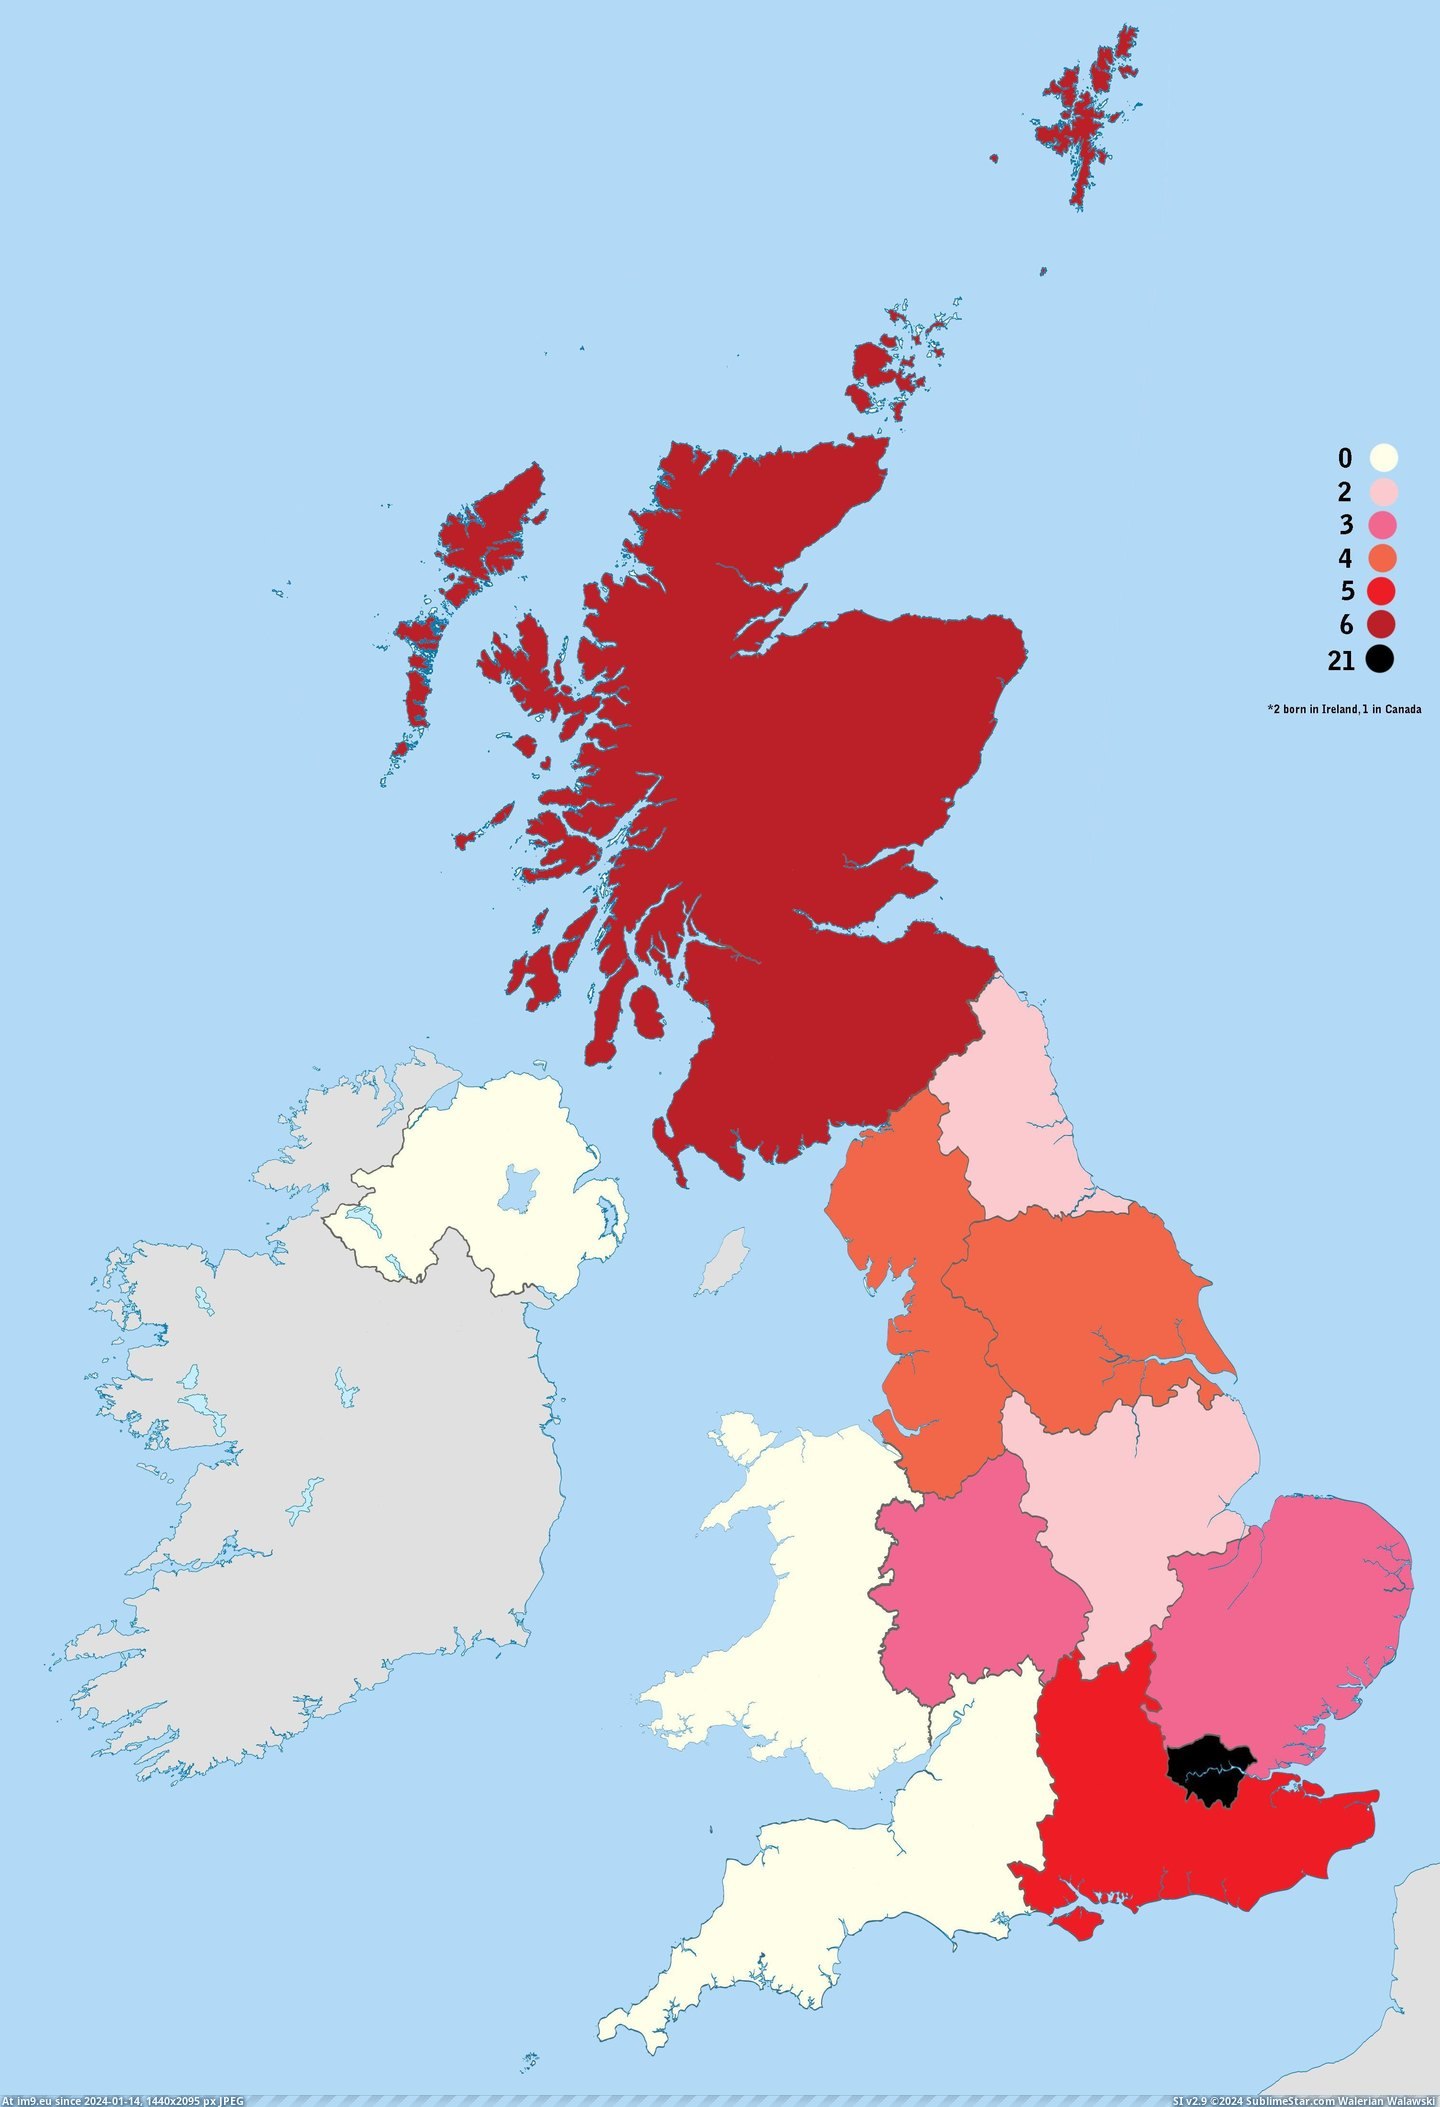 #British #Number #Regions #Ministers #Born #Prime [Mapporn] UK regions by number of British Prime Ministers born in each [3011x4392] [OC] Pic. (Изображение из альбом My r/MAPS favs))